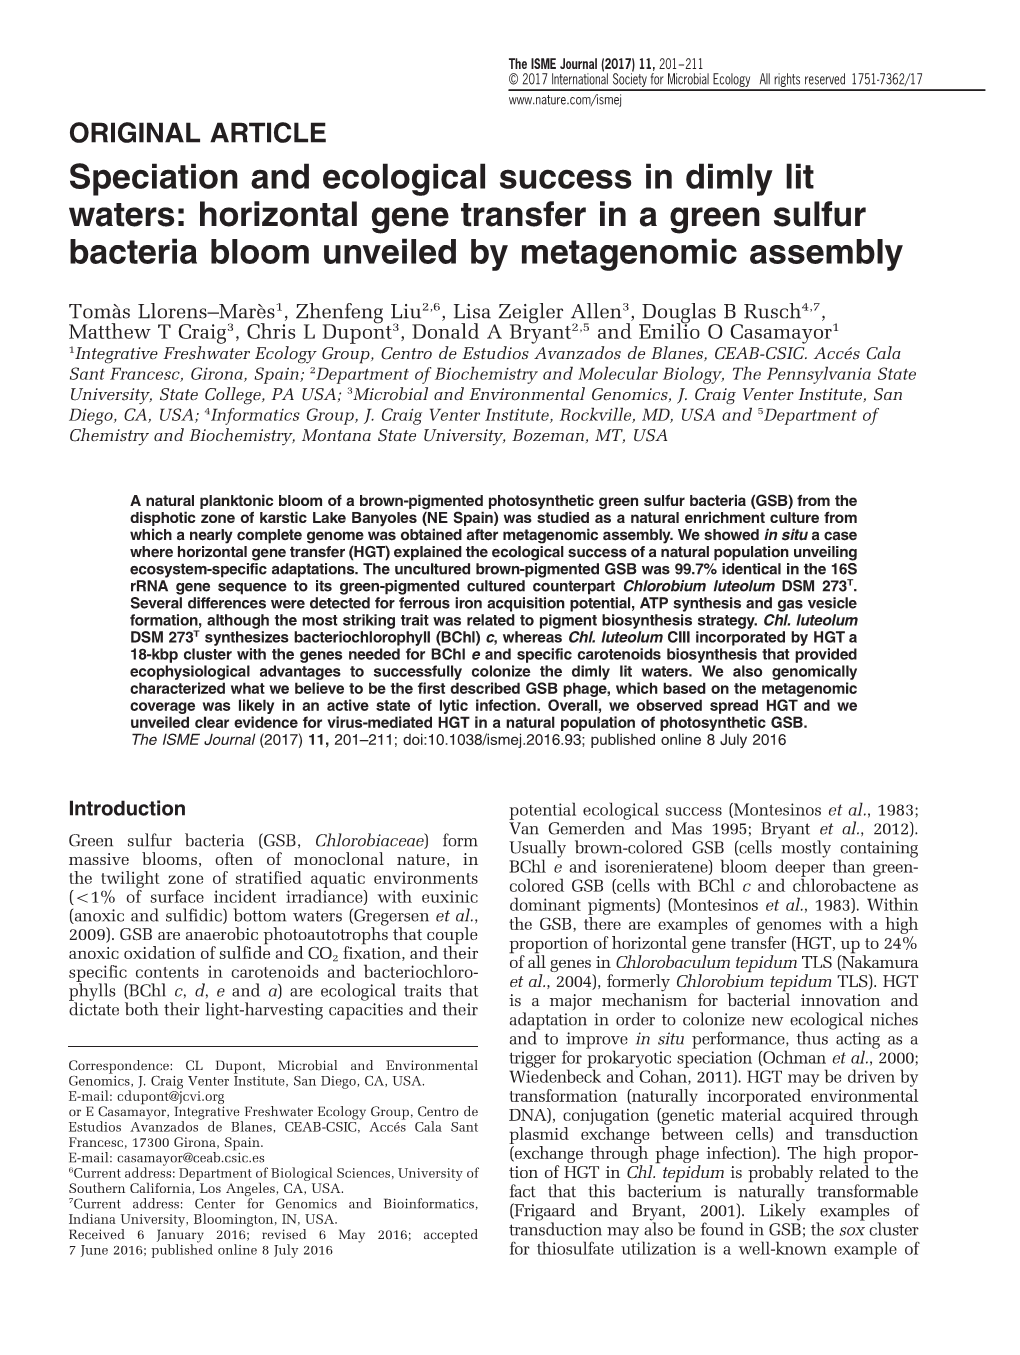 Speciation and Ecological Success in Dimly Lit Waters: Horizontal Gene Transfer in a Green Sulfur Bacteria Bloom Unveiled by Metagenomic Assembly